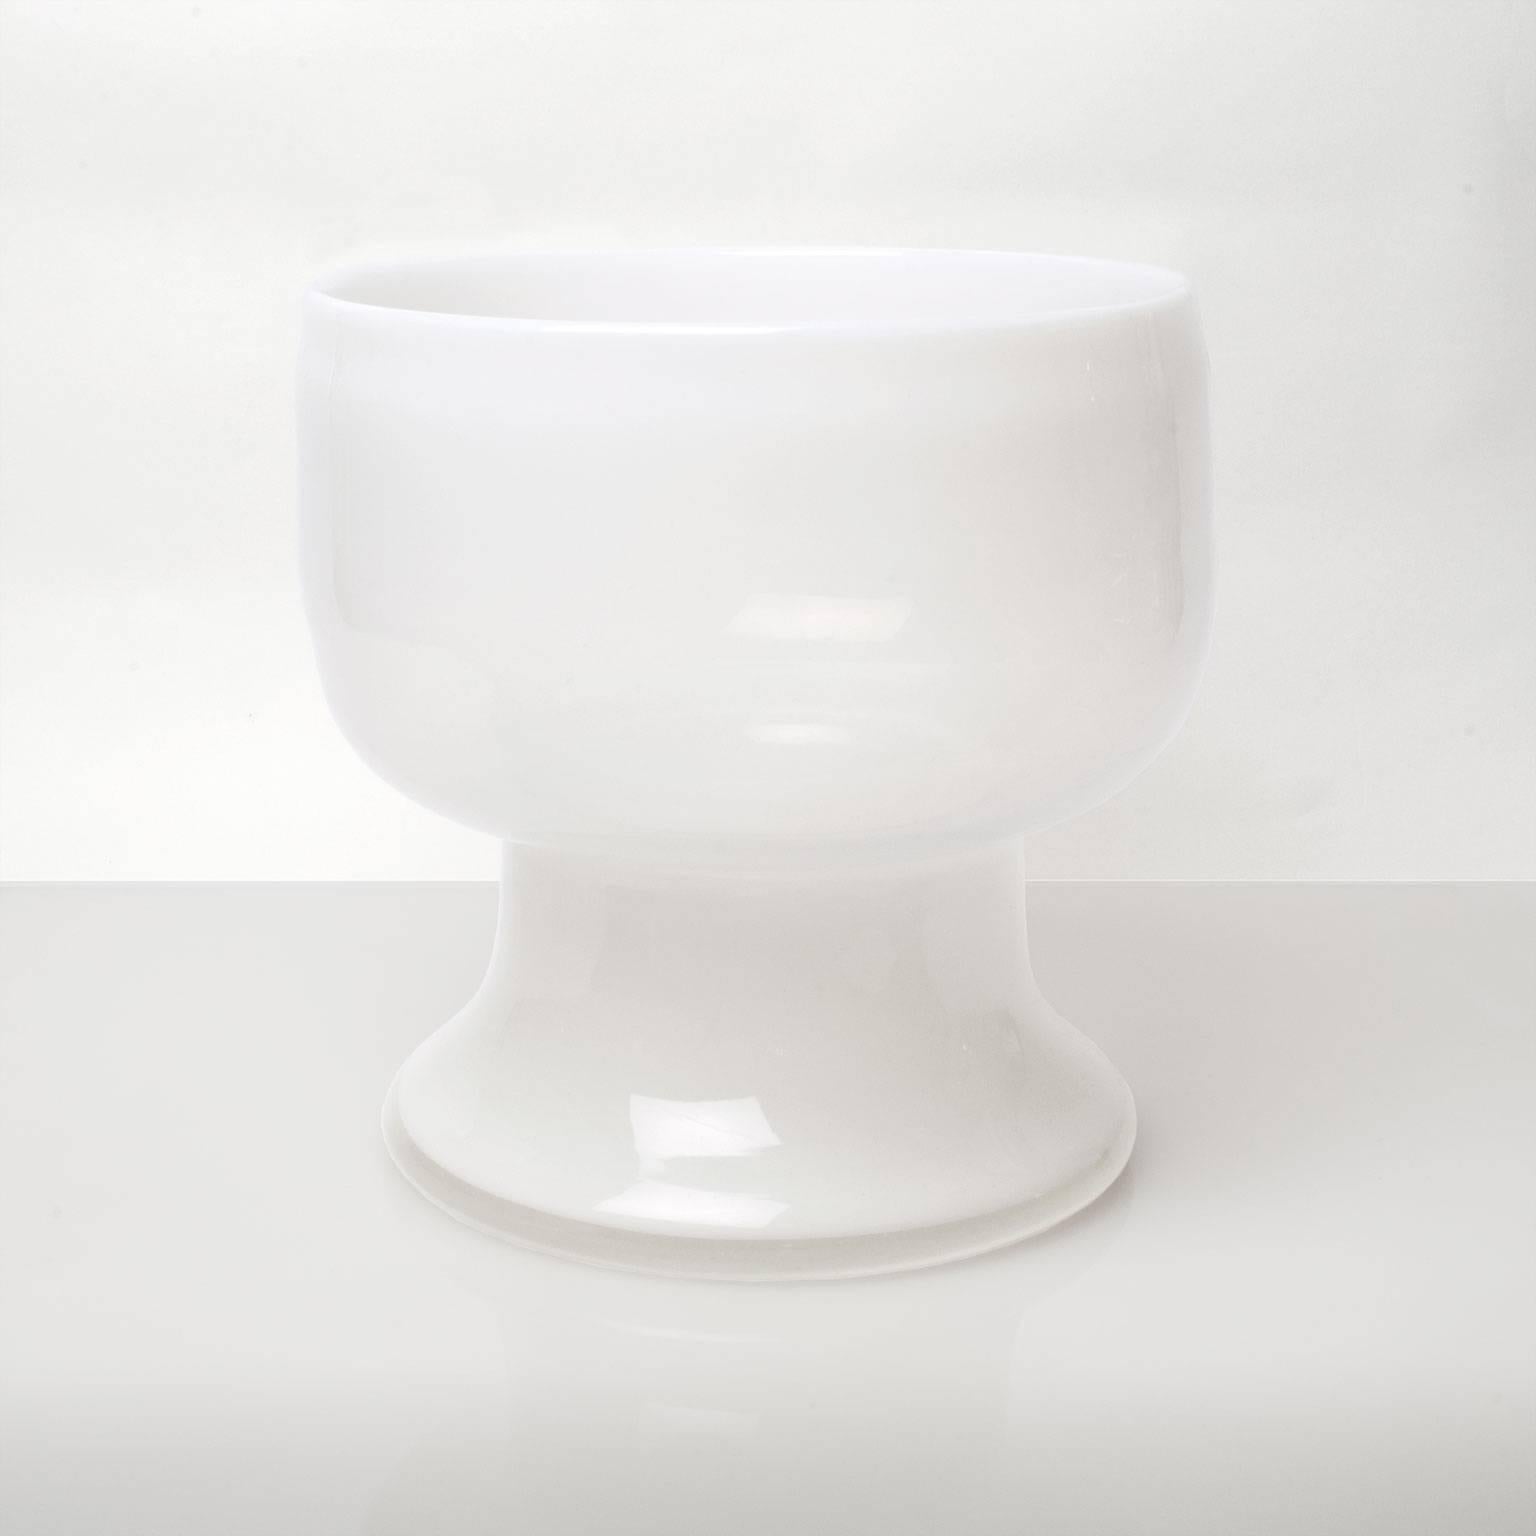 Large-scale Scandinavian modern opalescent glass footed vase by Erik Hoglund for Boda, Sweden. Measures: Height: 10.5